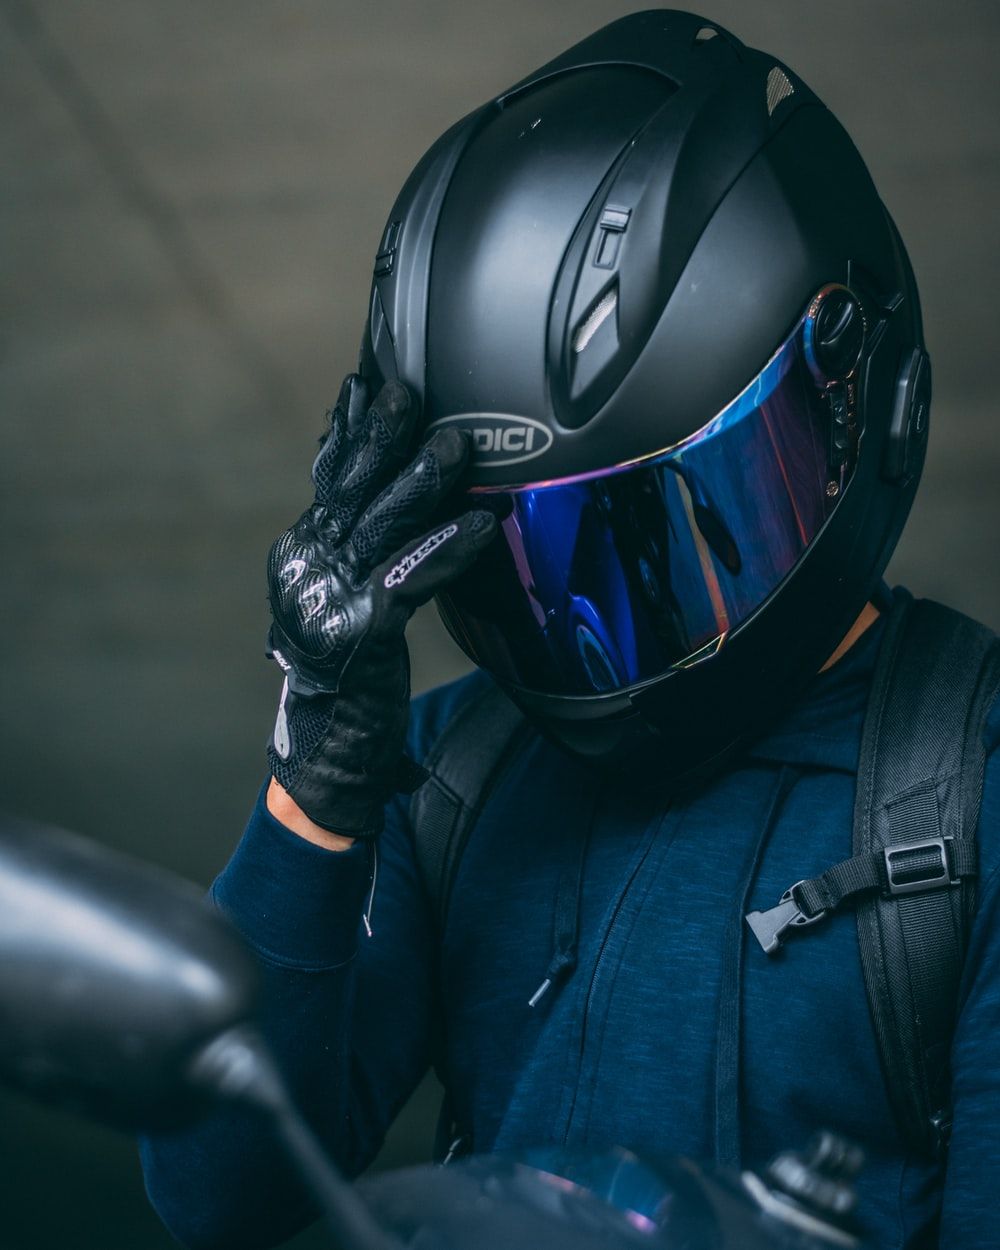 Helmet Picture [HD]. Download Free Image